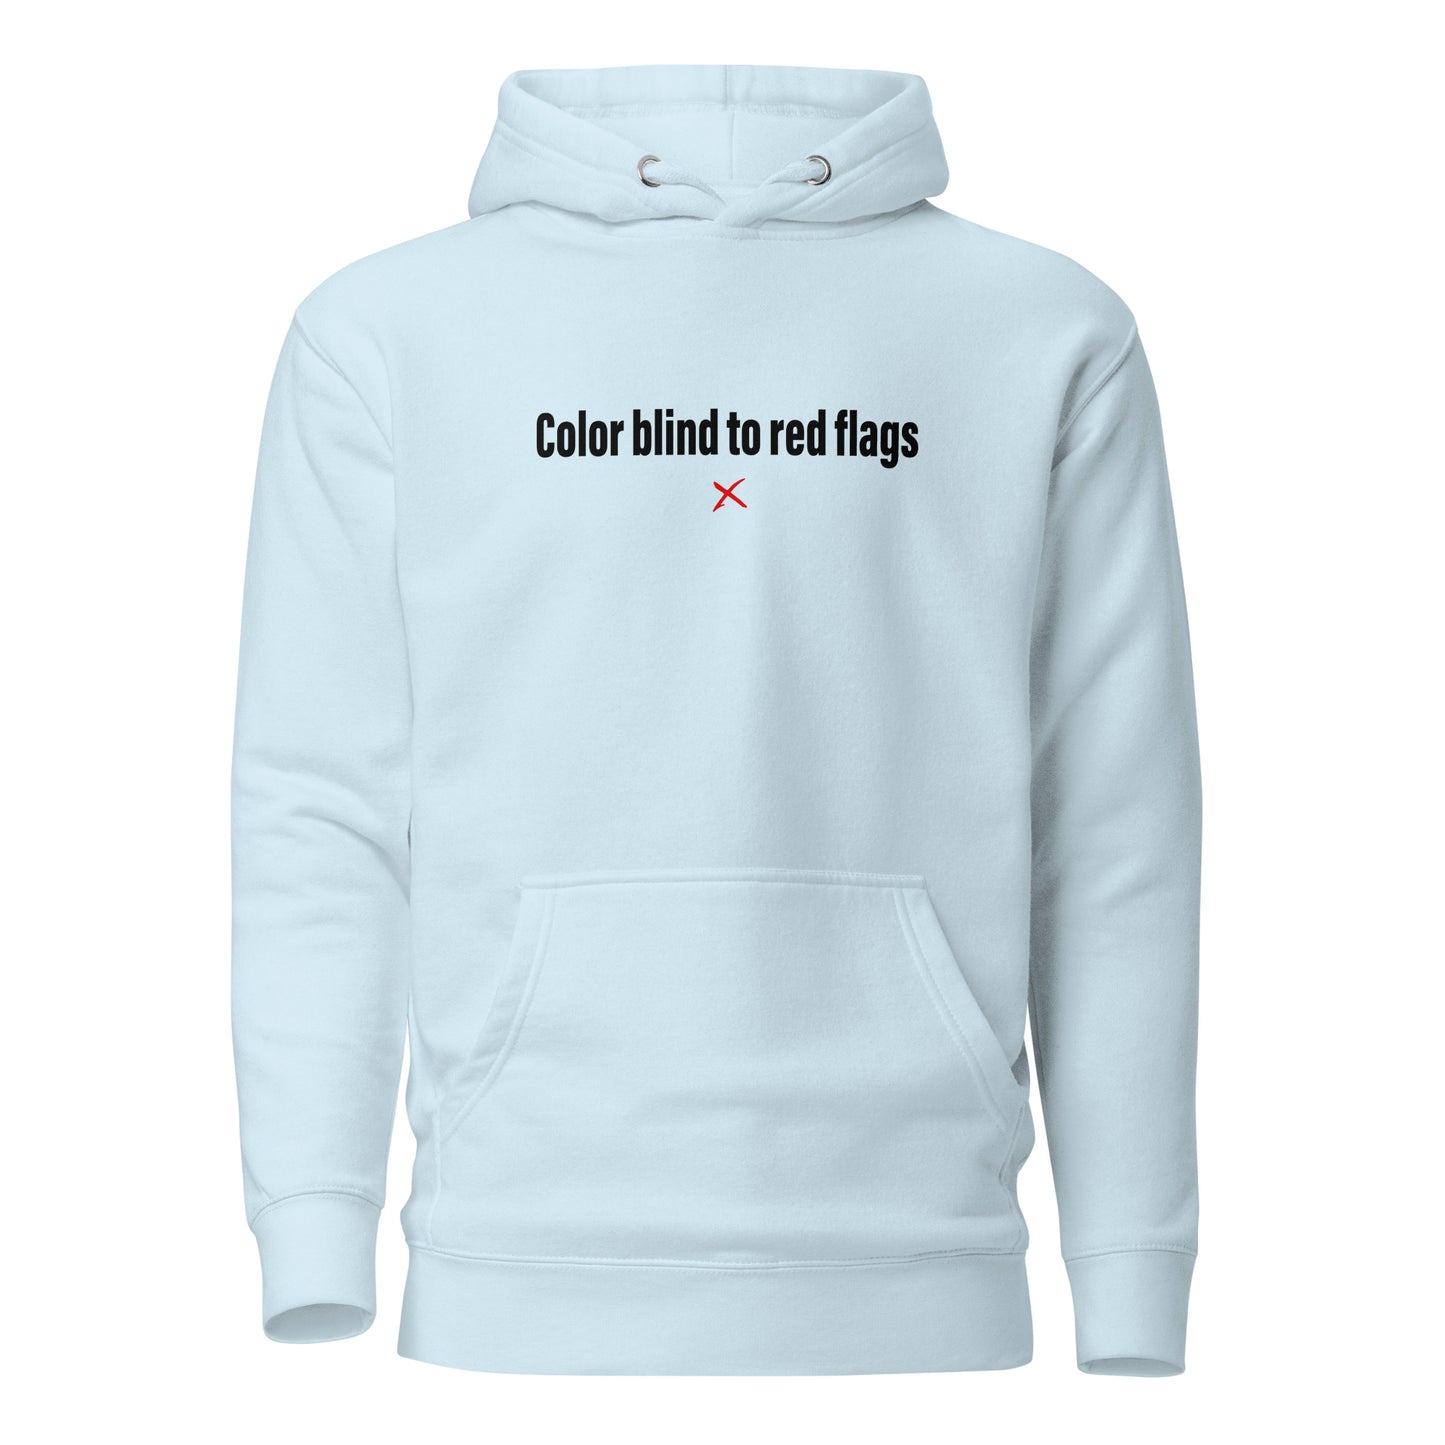 Color blind to red flags - Hoodie